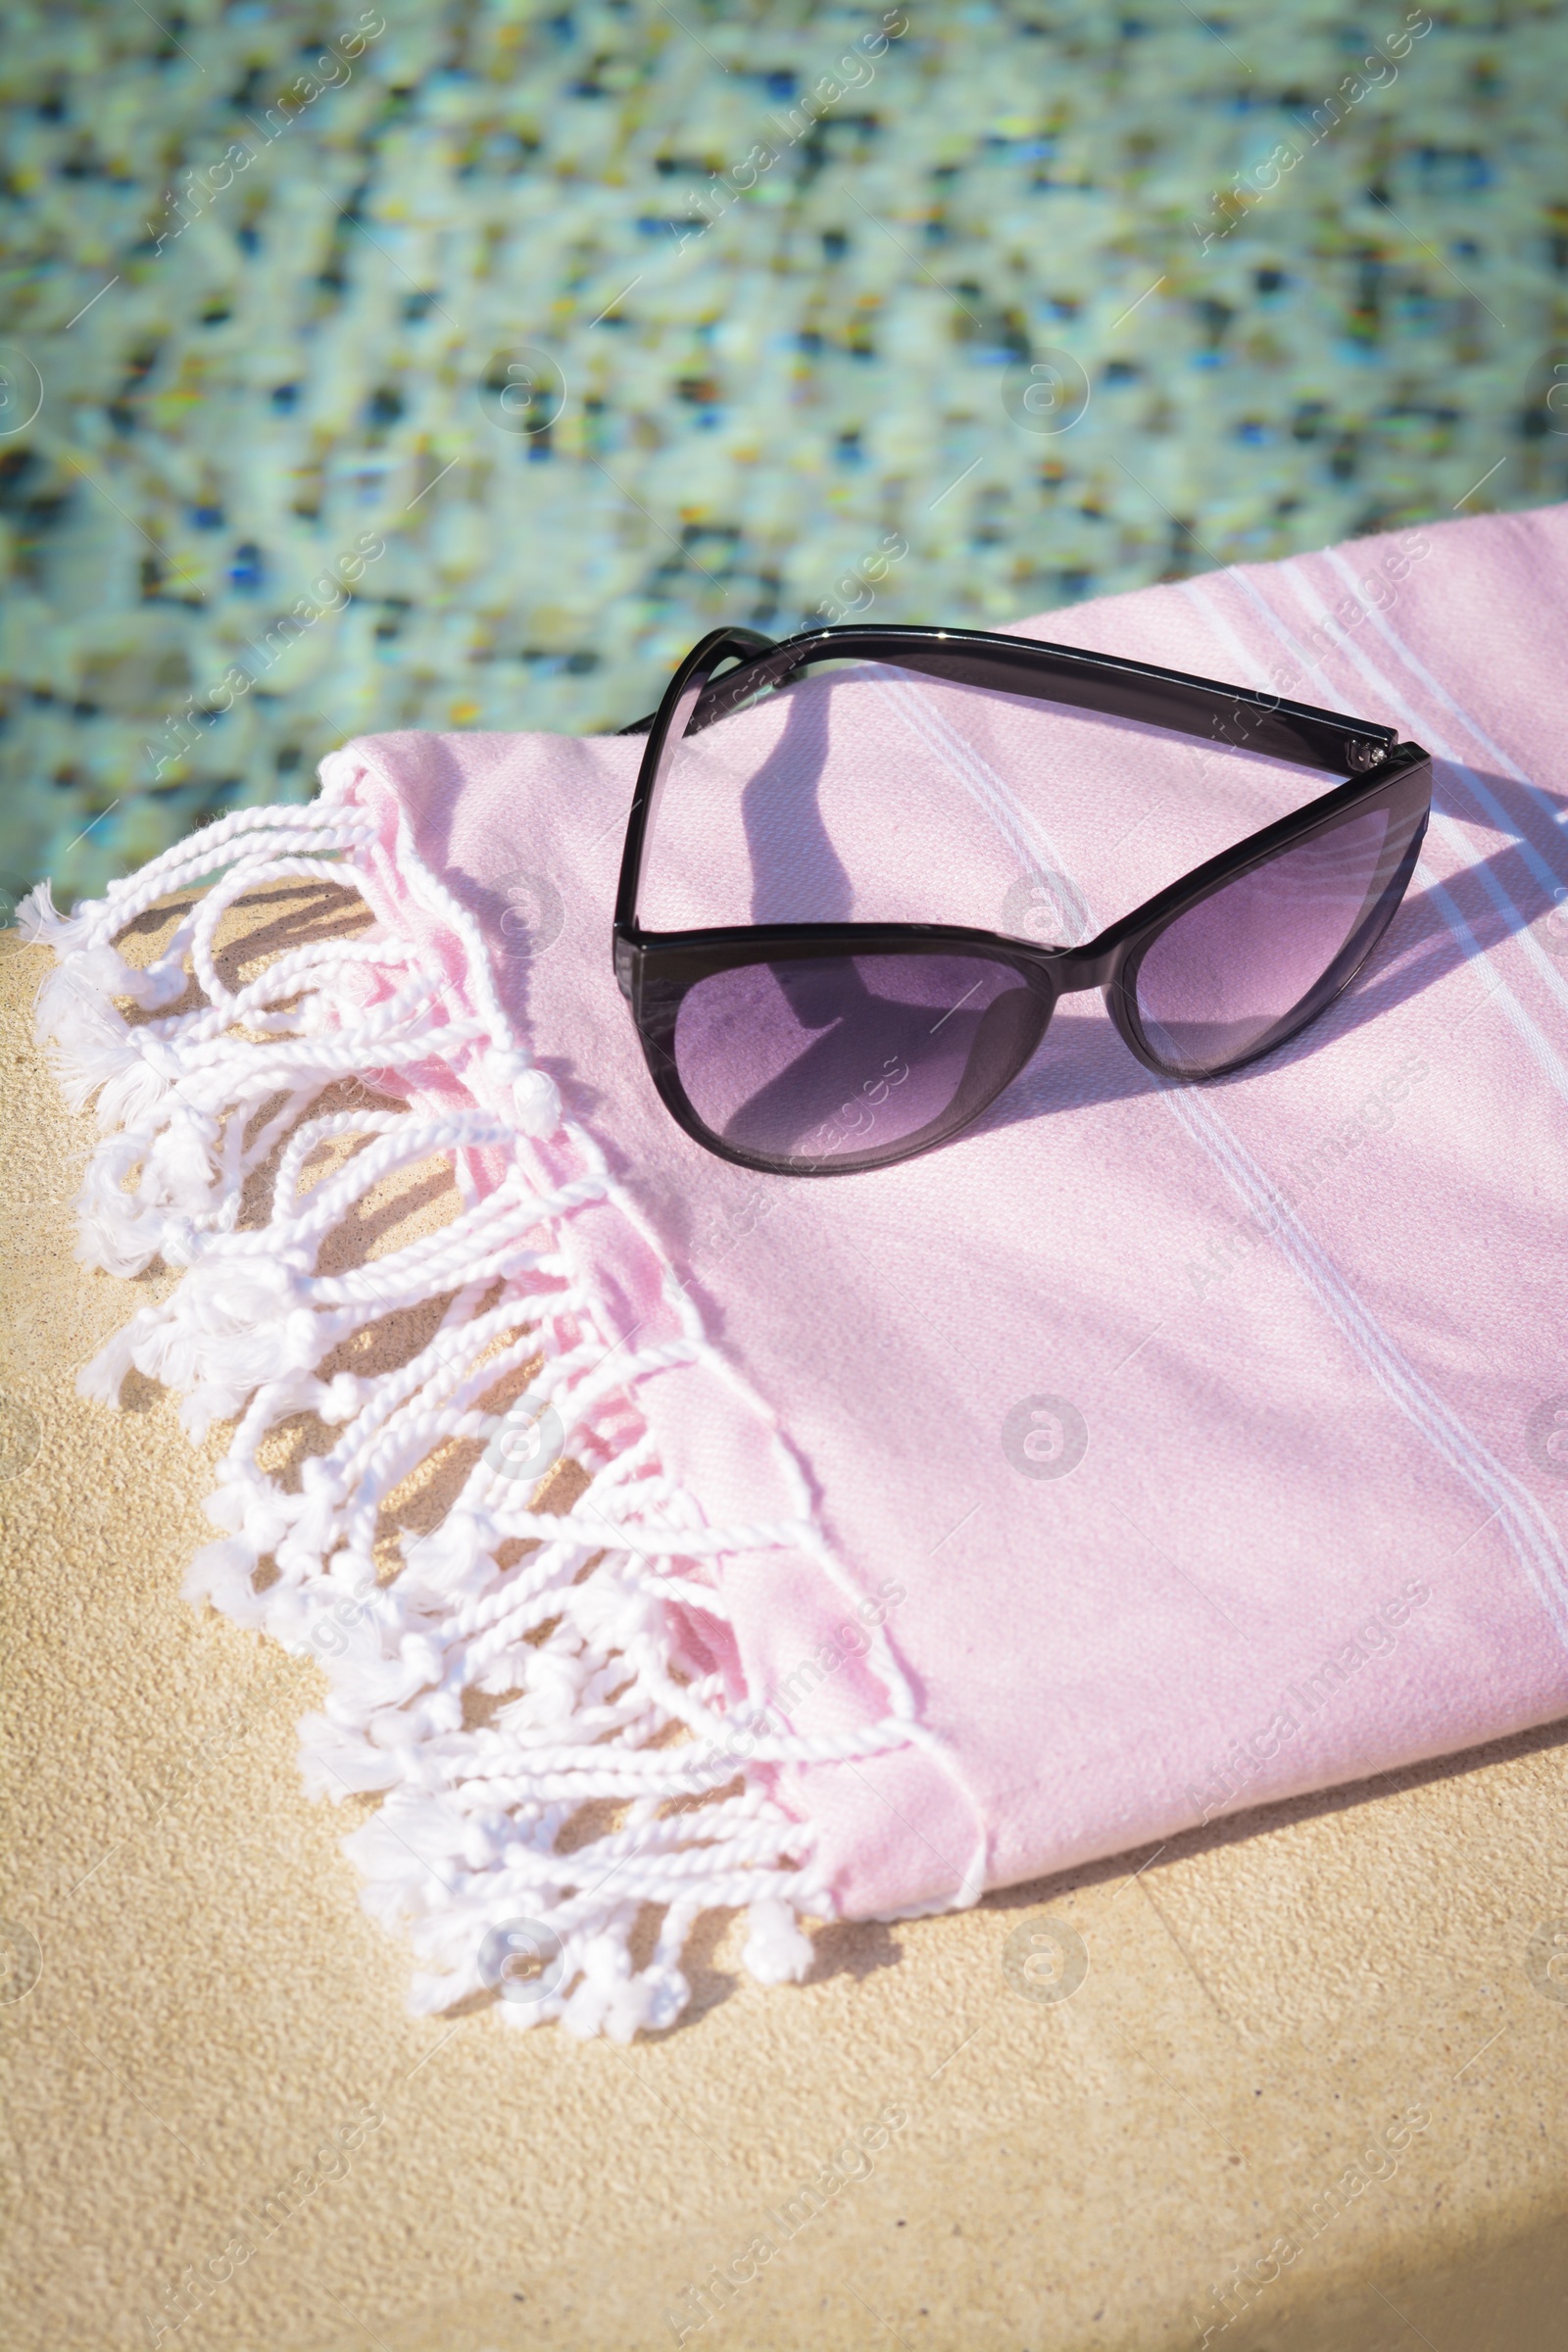 Photo of Stylish sunglasses and blanket near outdoor pool on sunny day